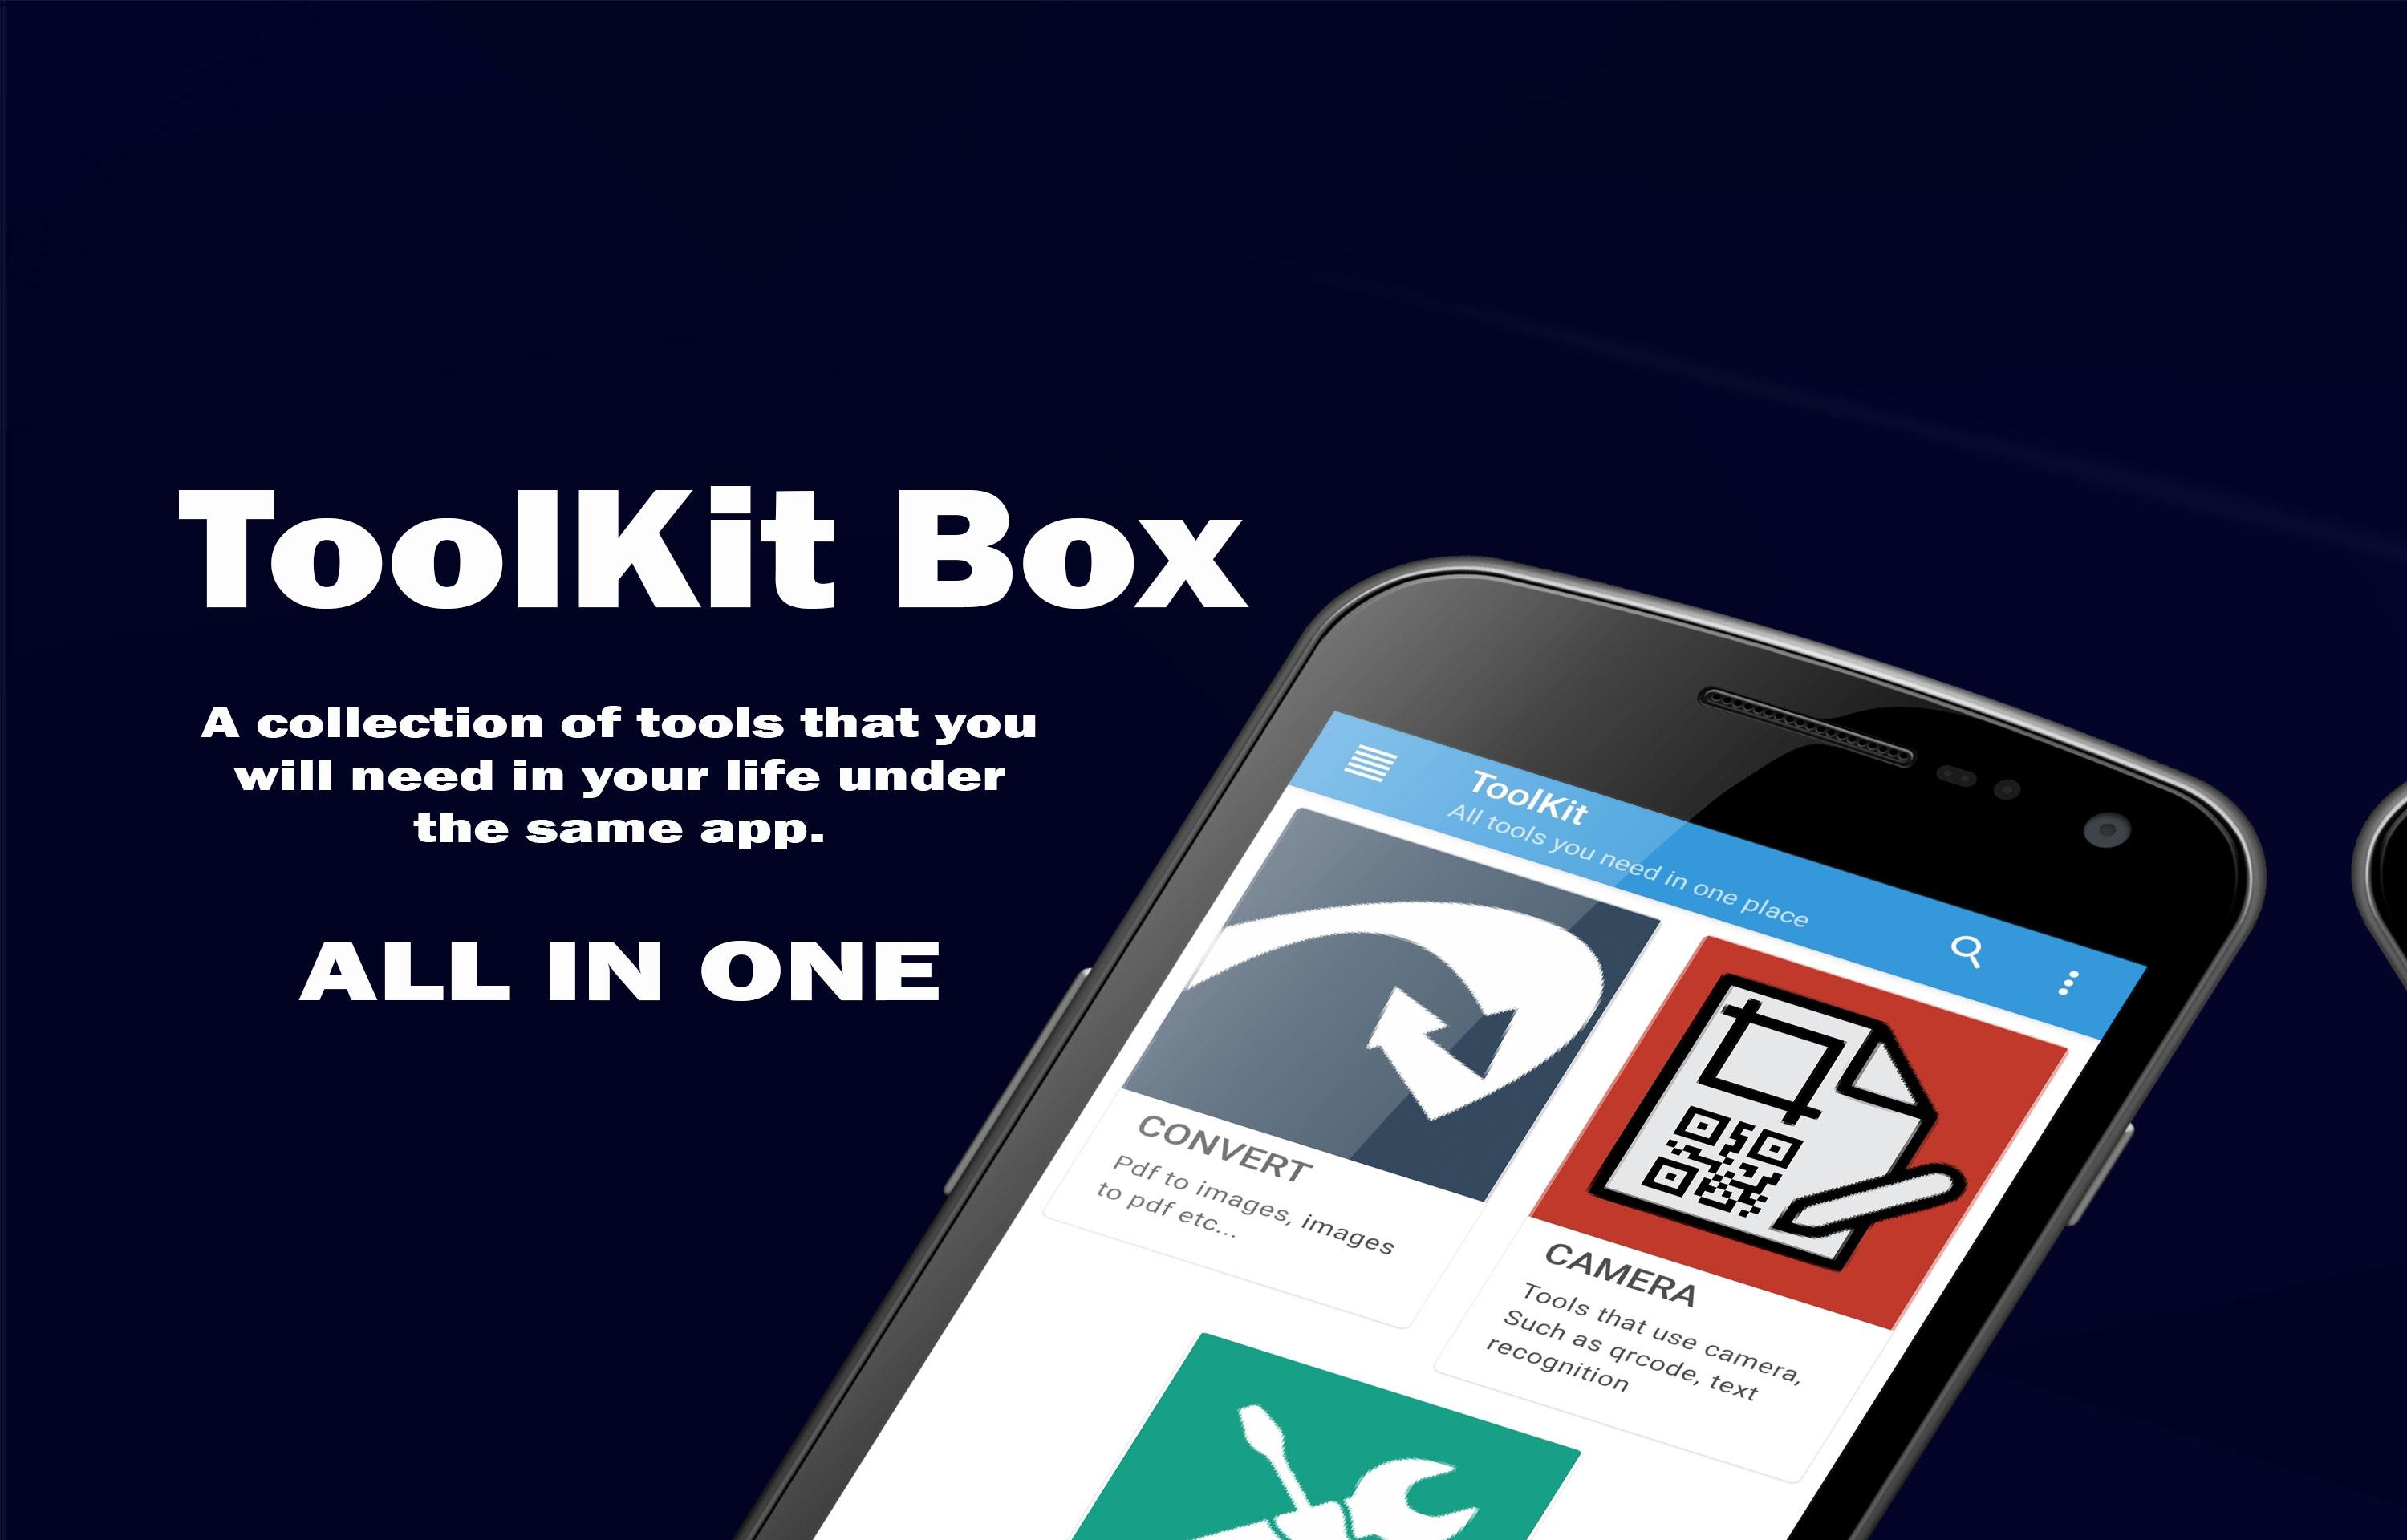 Toolkit Box | All Tools you need in one place 3.0 Screenshot 9